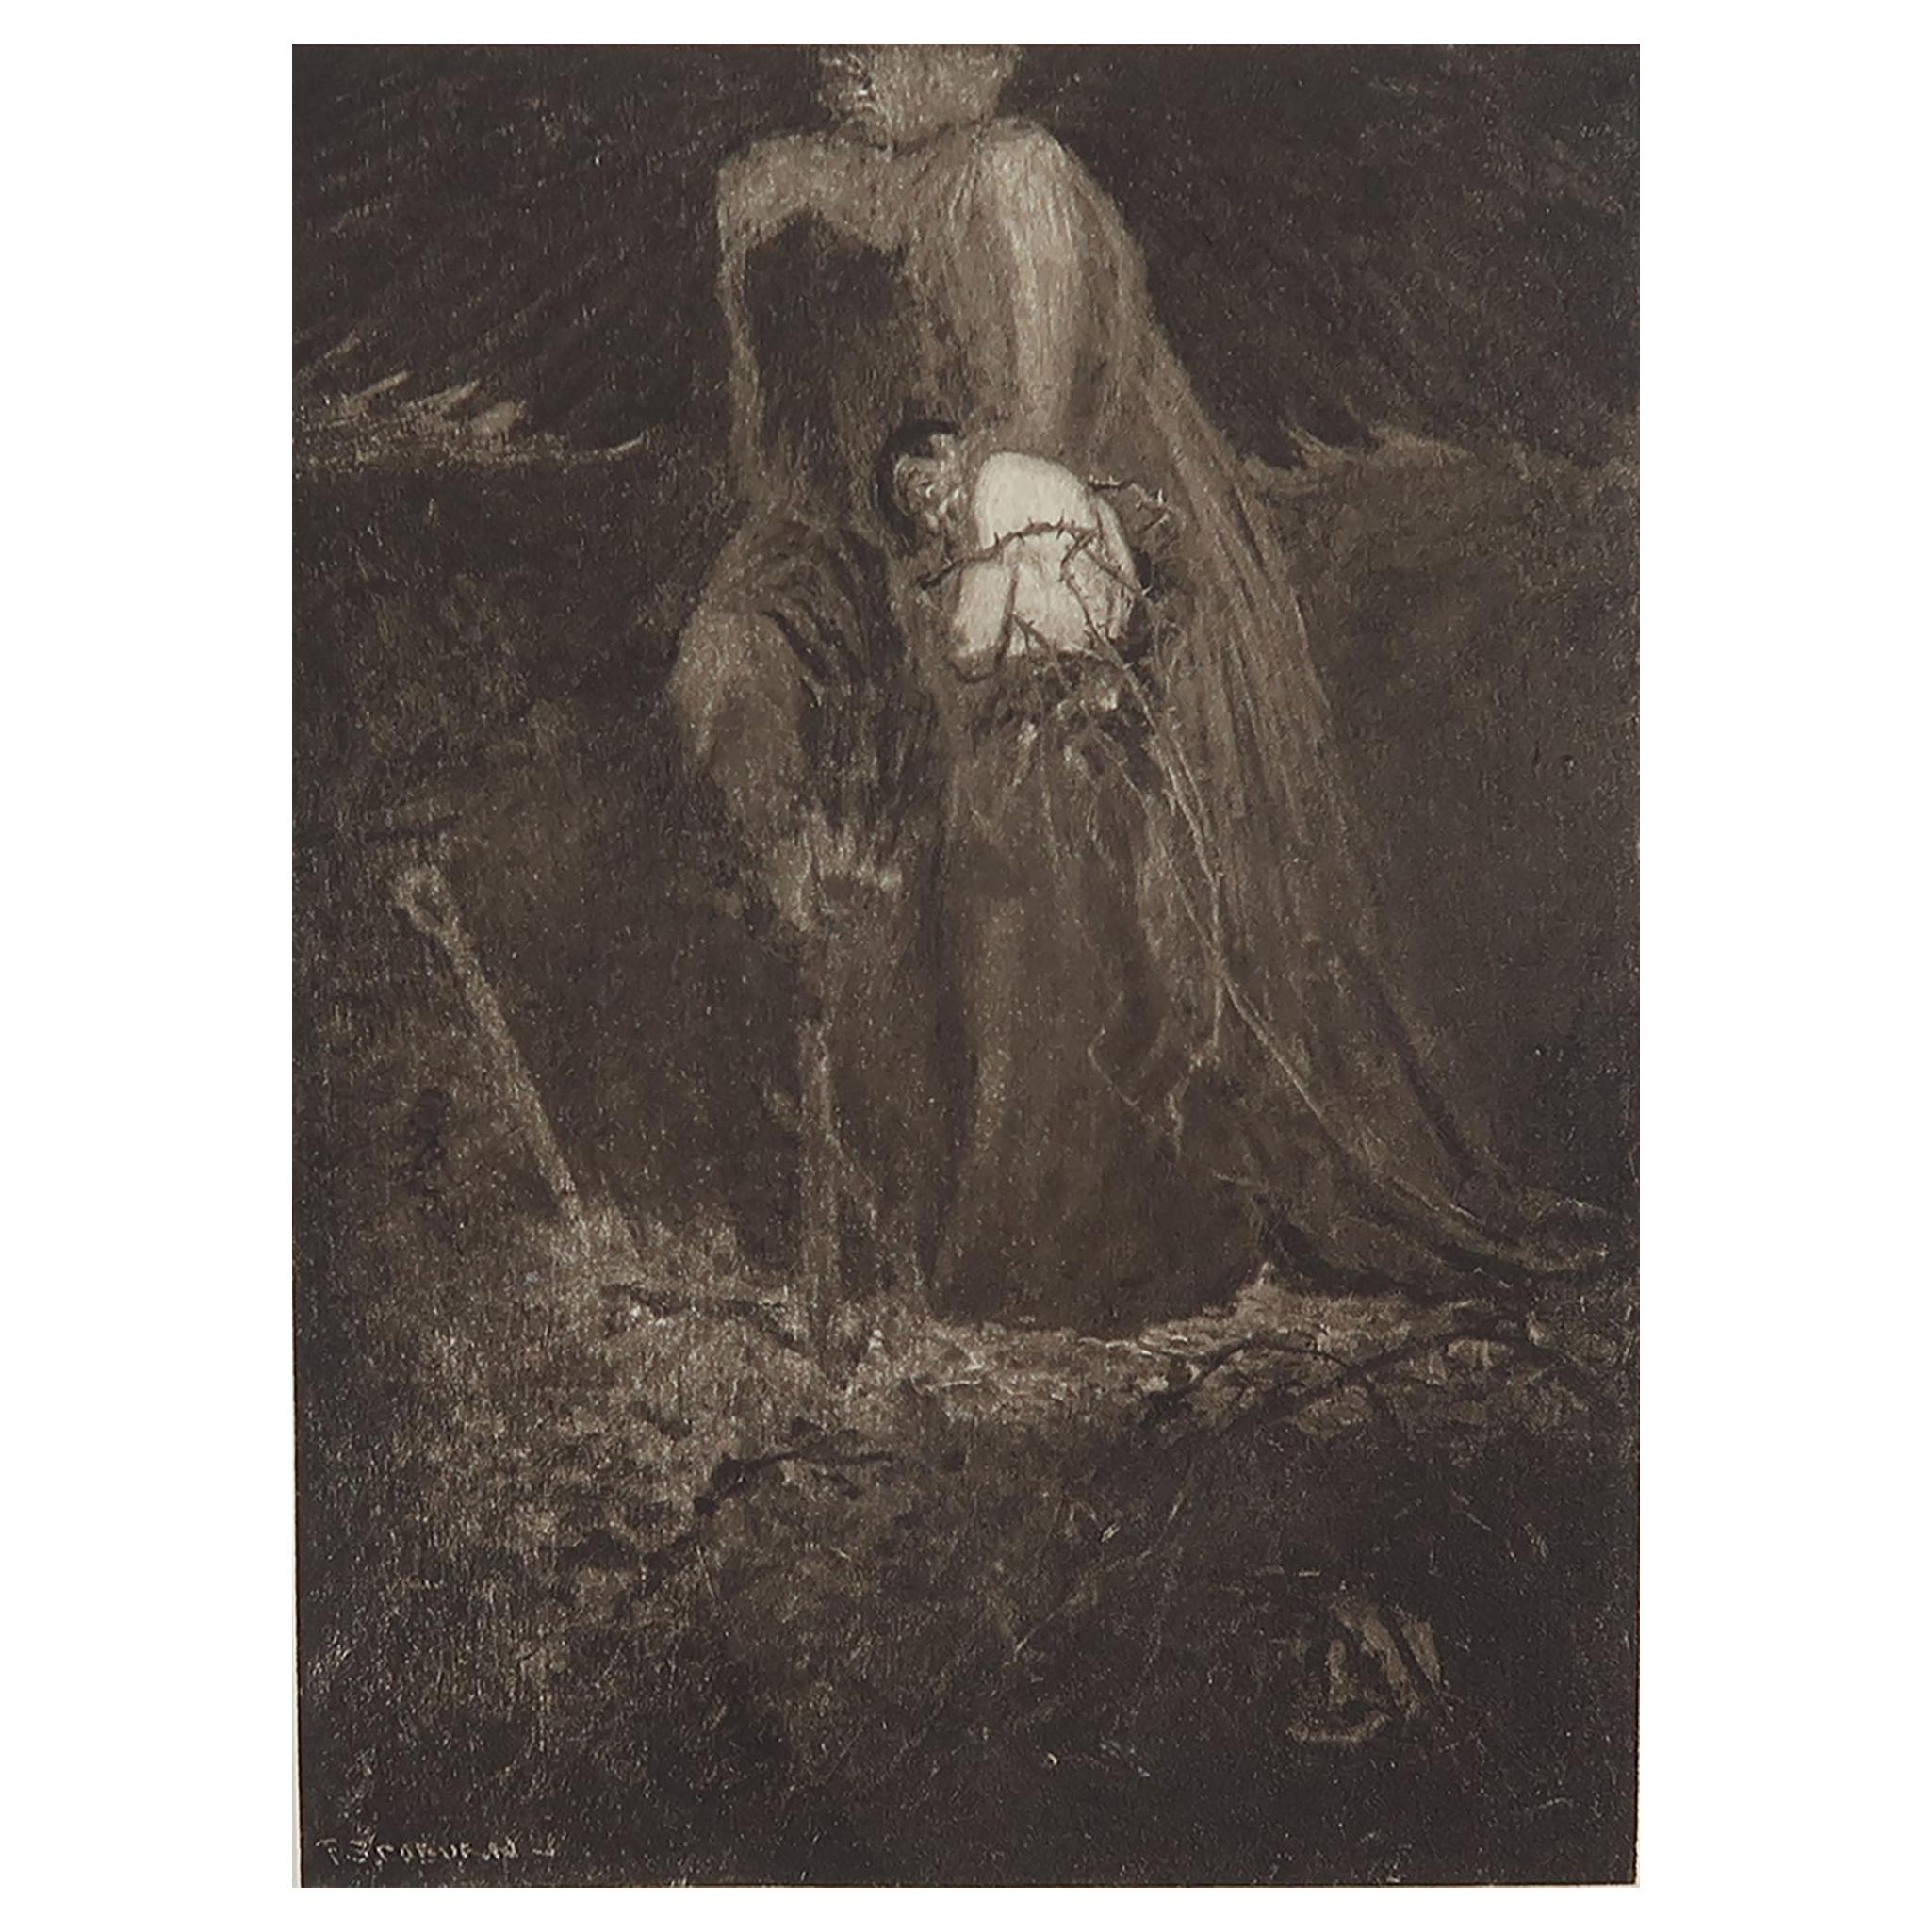 Original Limited Edition Print by Frederick Simpson Coburn- Berenice, 1902